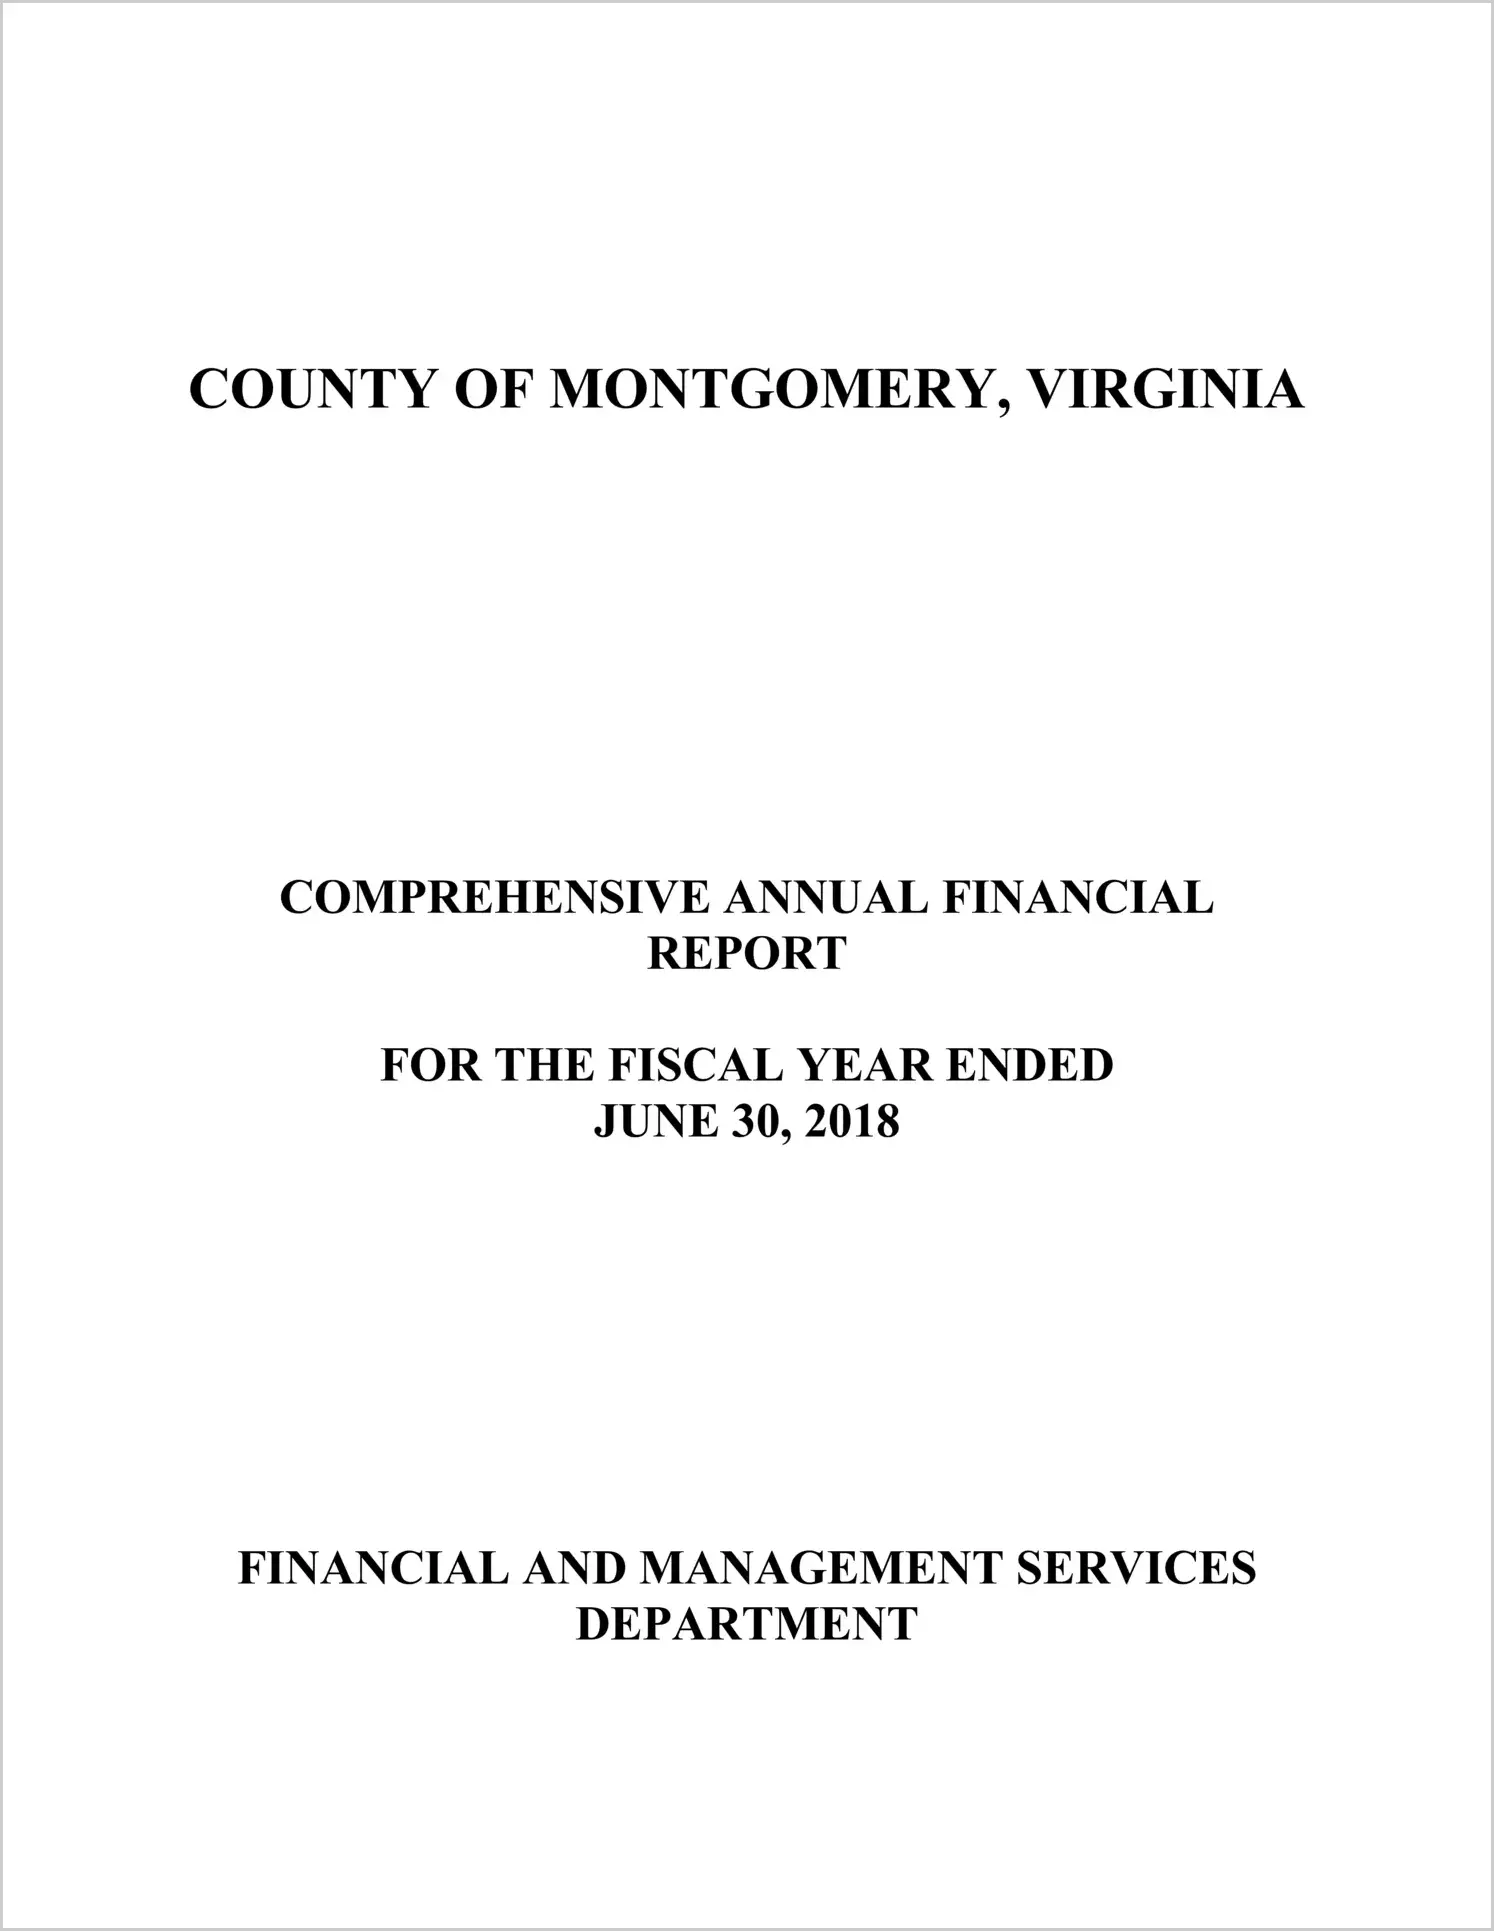 2018 Annual Financial Report for County of Montgomery